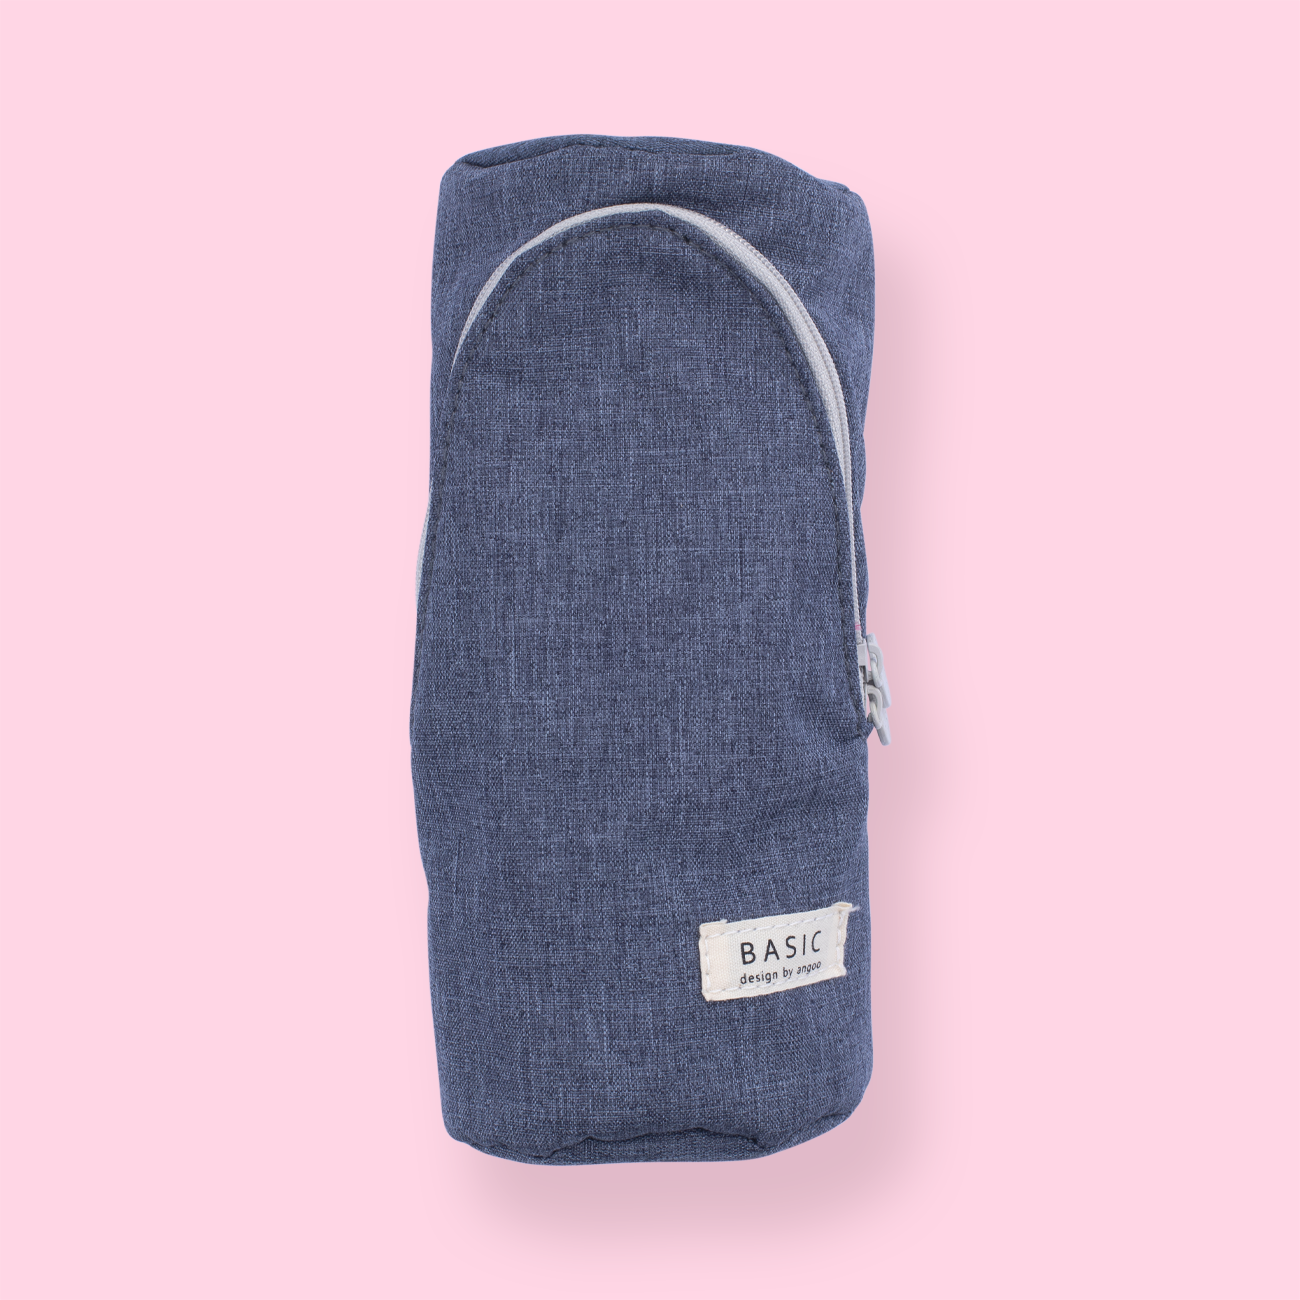 Stand Up Pencil Case - Dark Blue + Gray Side